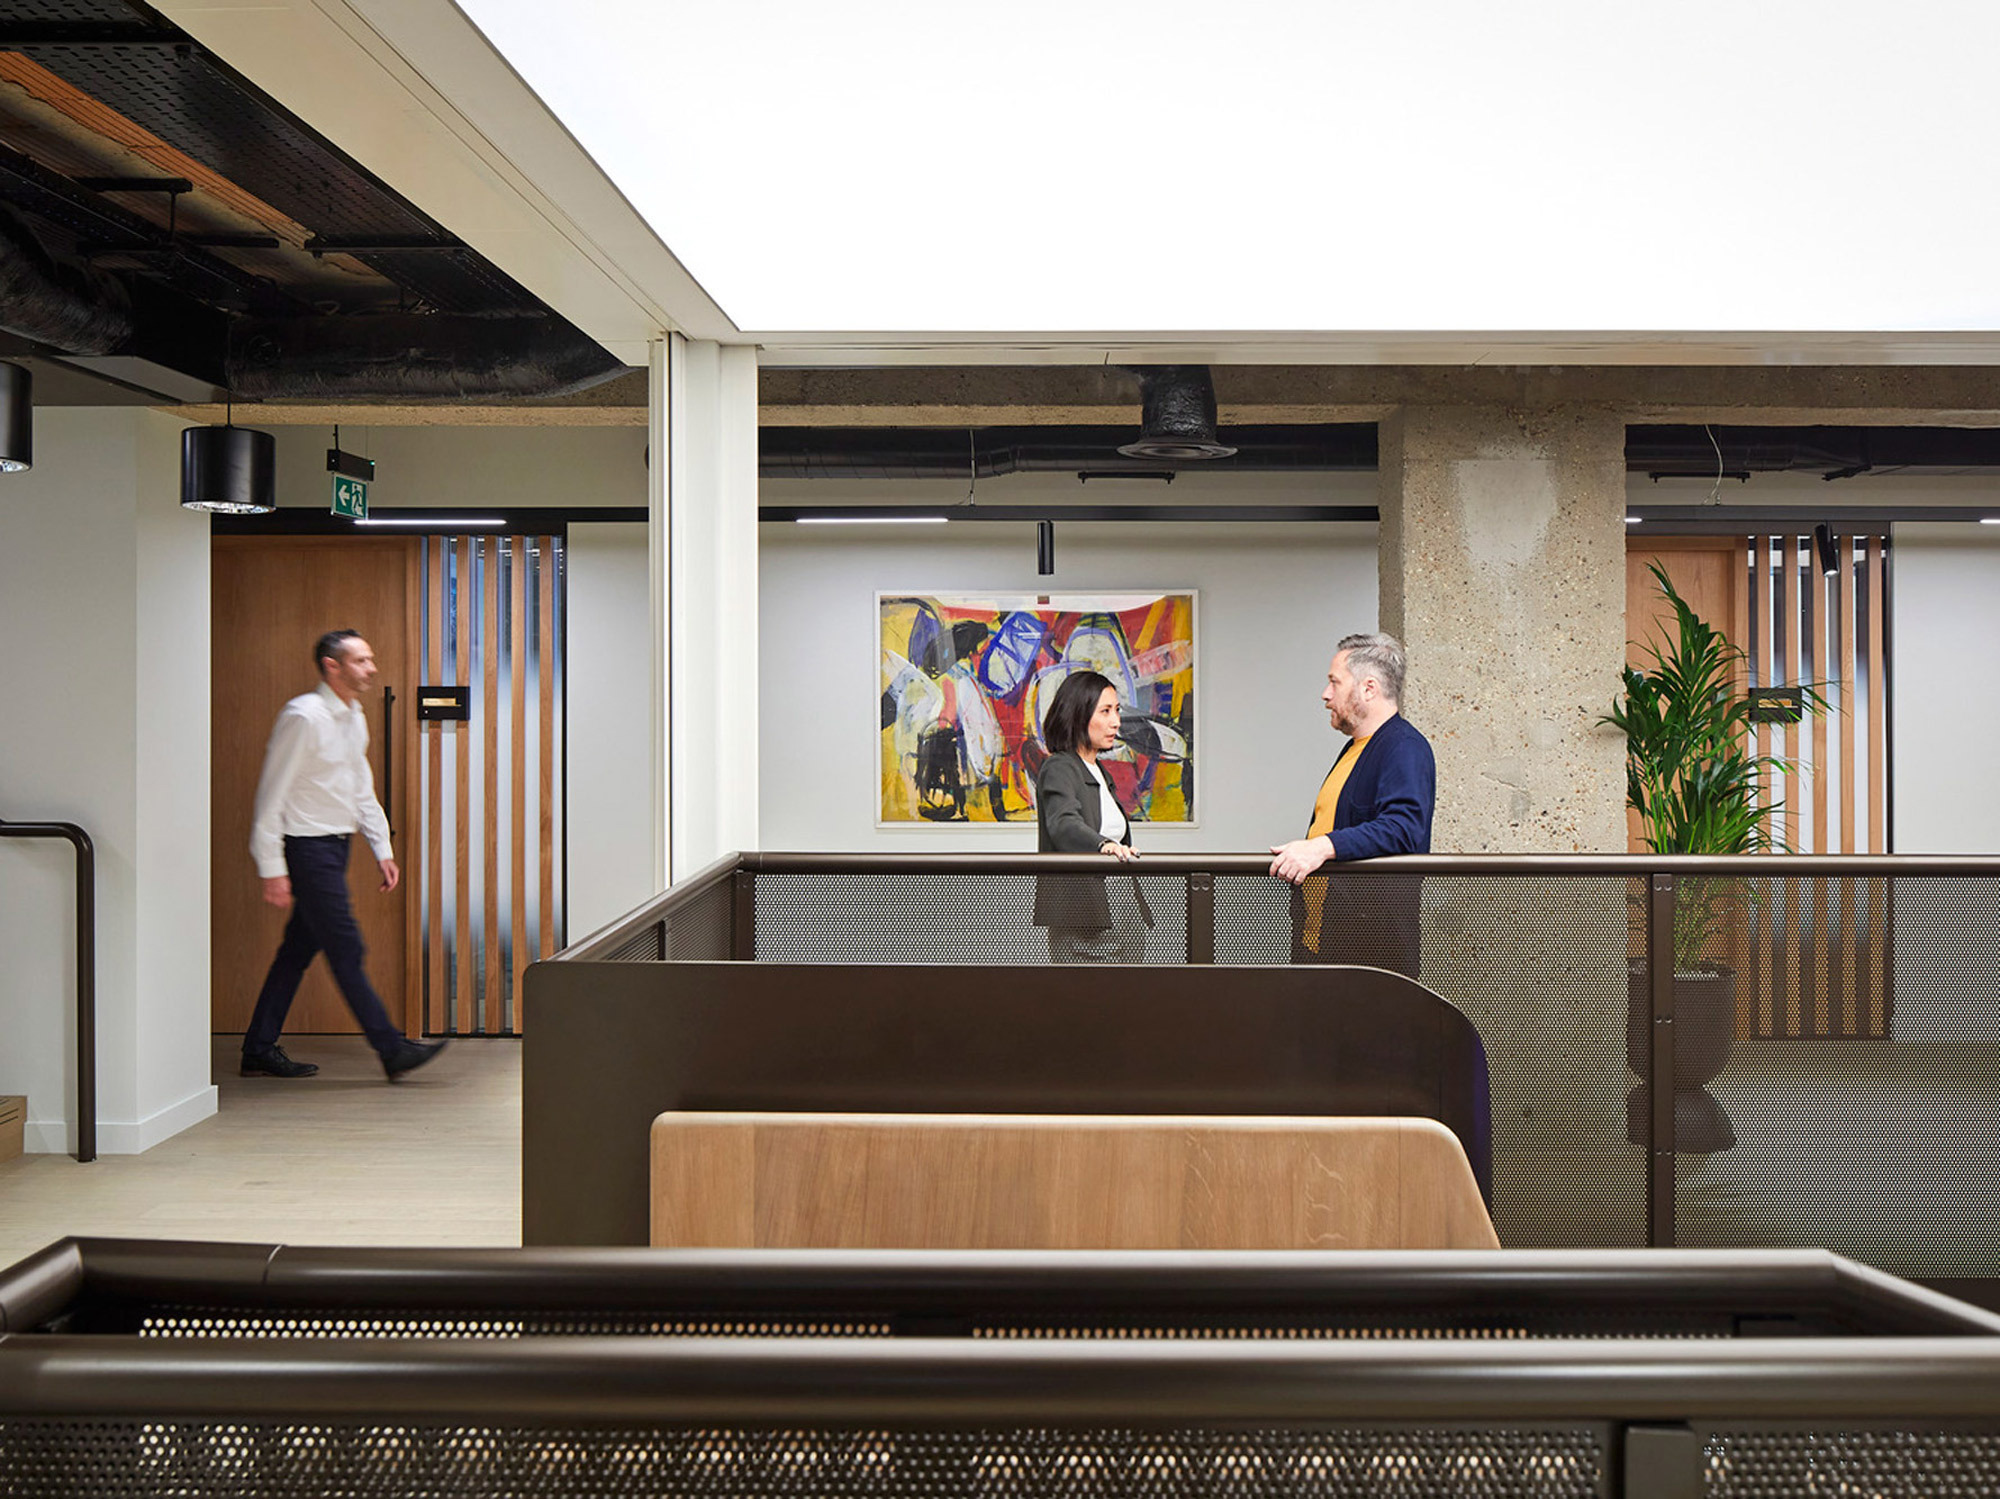 Open-plan office space featuring industrial design elements with exposed ceiling beams and concrete pillars. Two professionals engage in conversation near a glass partition with vibrant abstract art, while another walks by, emphasizing the dynamic work environment. Minimalist wood and black metal reception desk foreground.